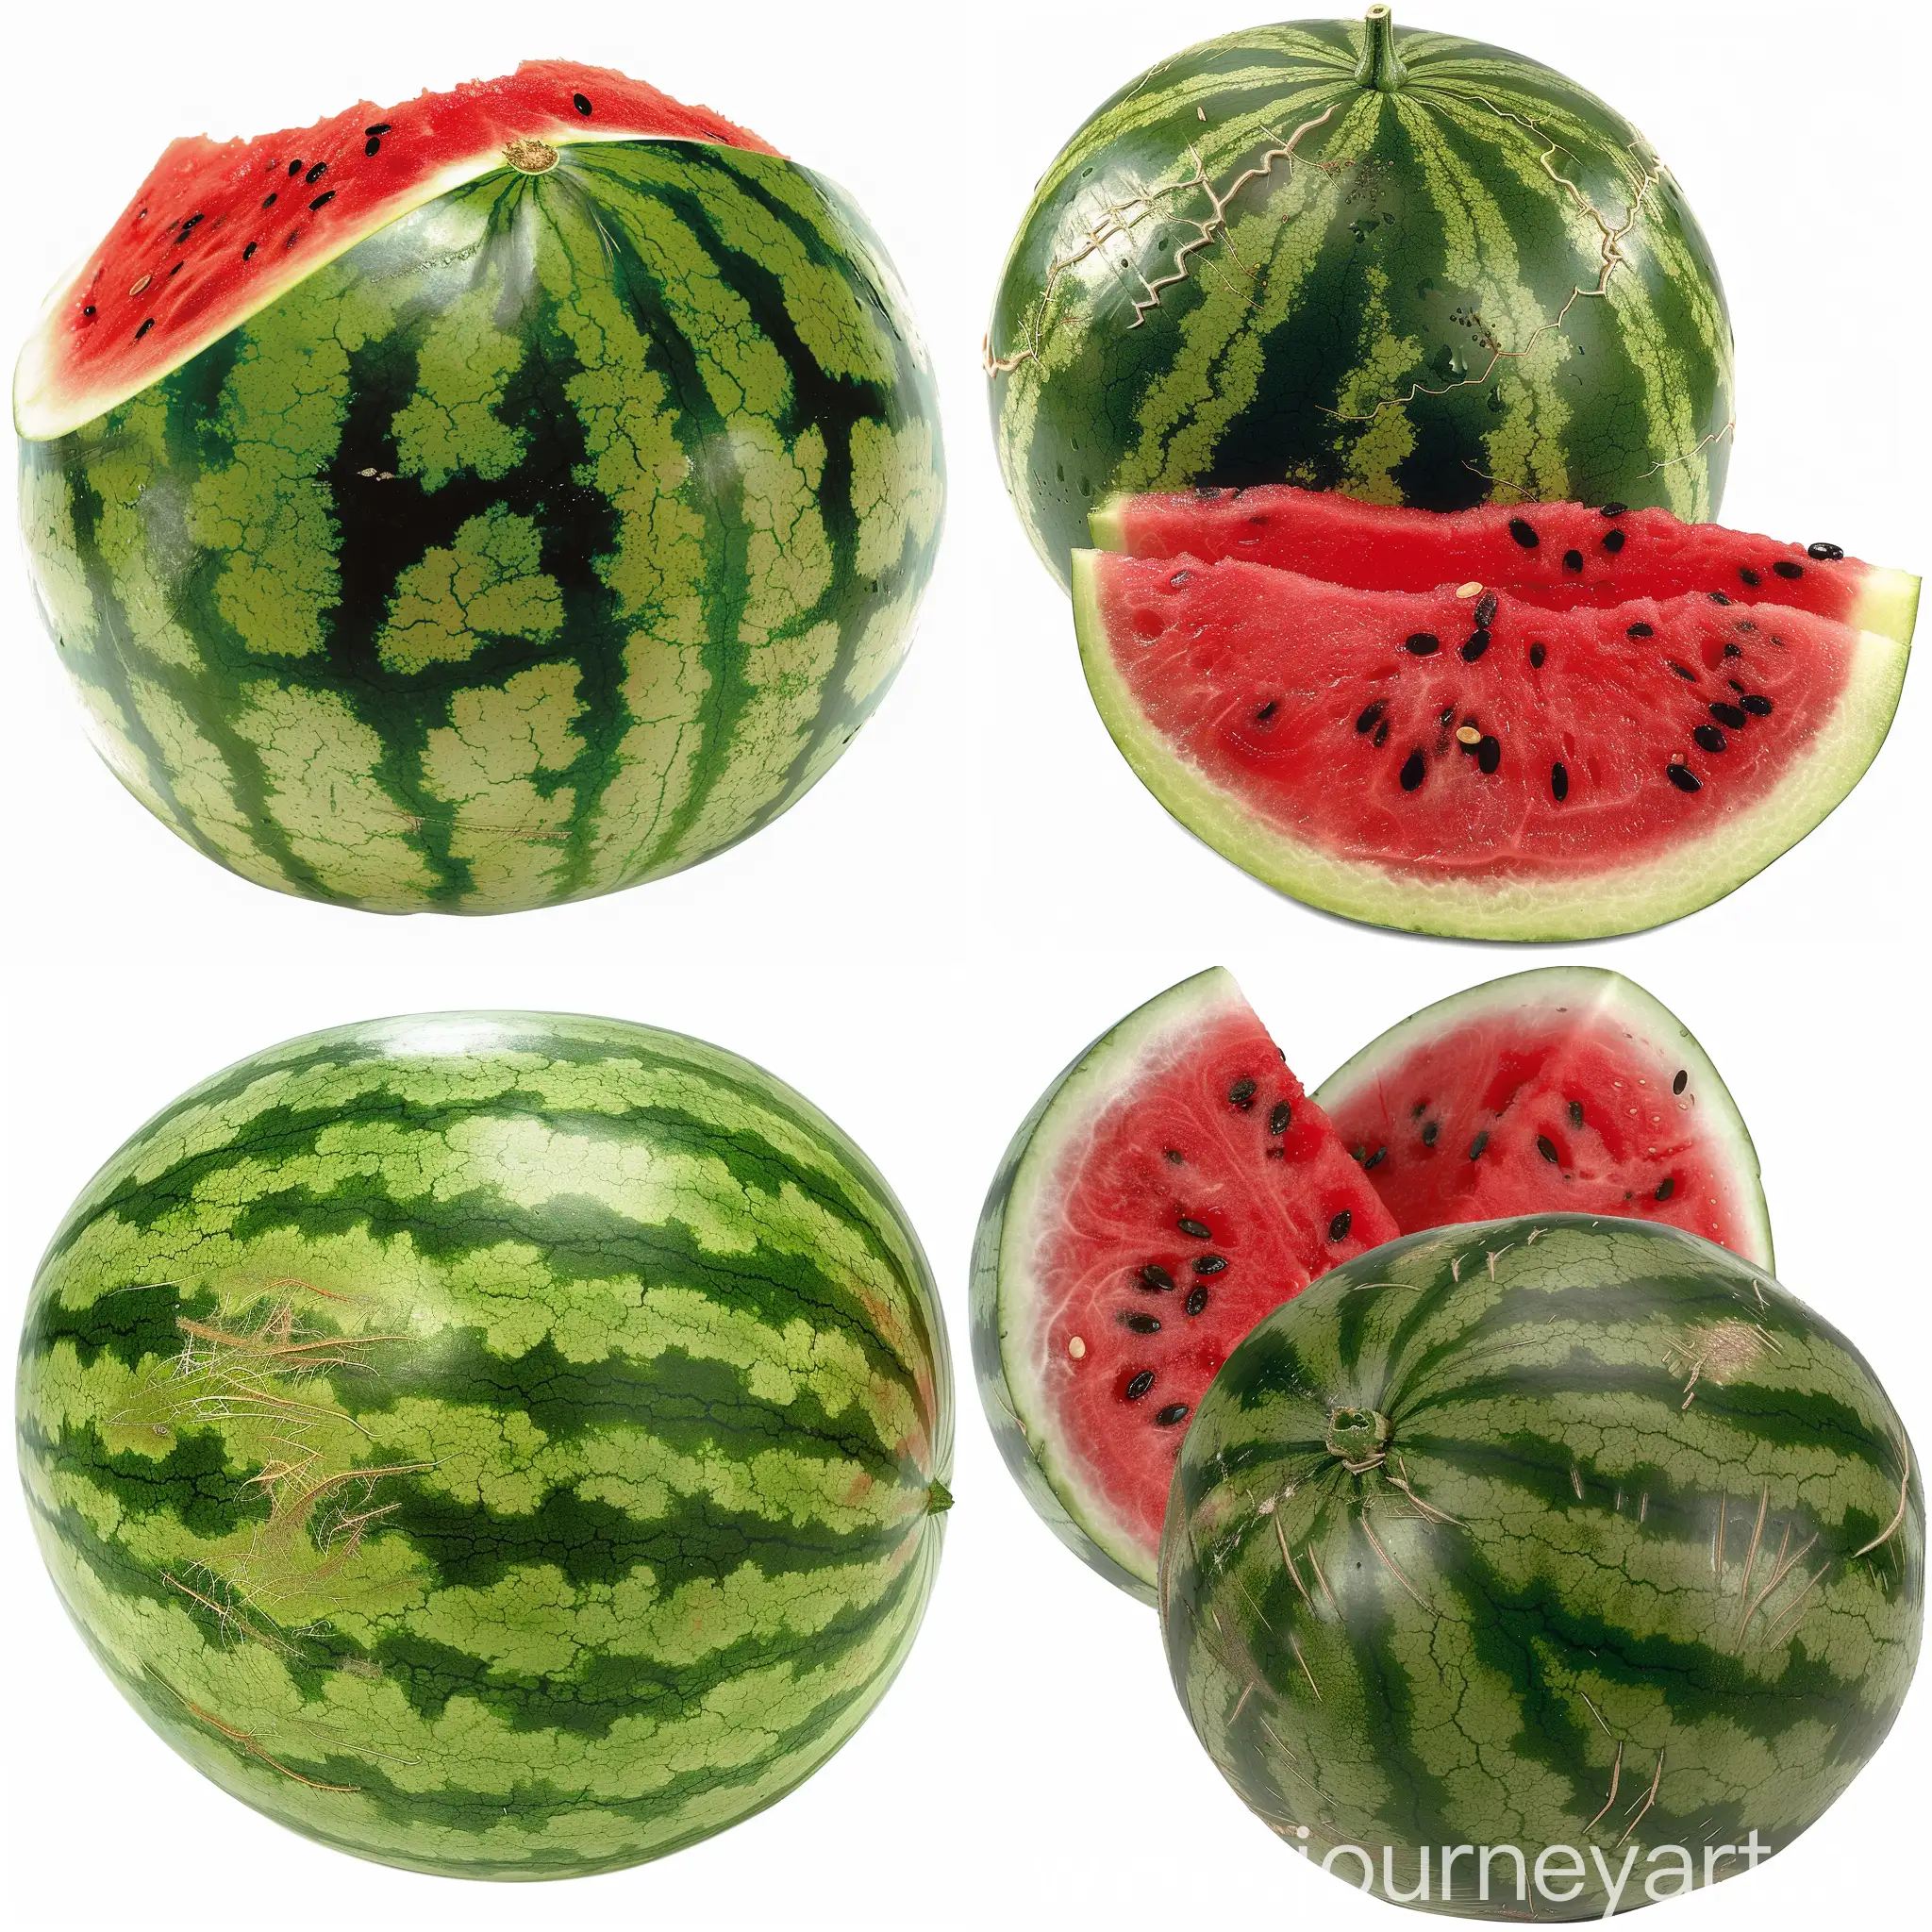 Colorful-Watermelon-Slices-on-a-White-Background